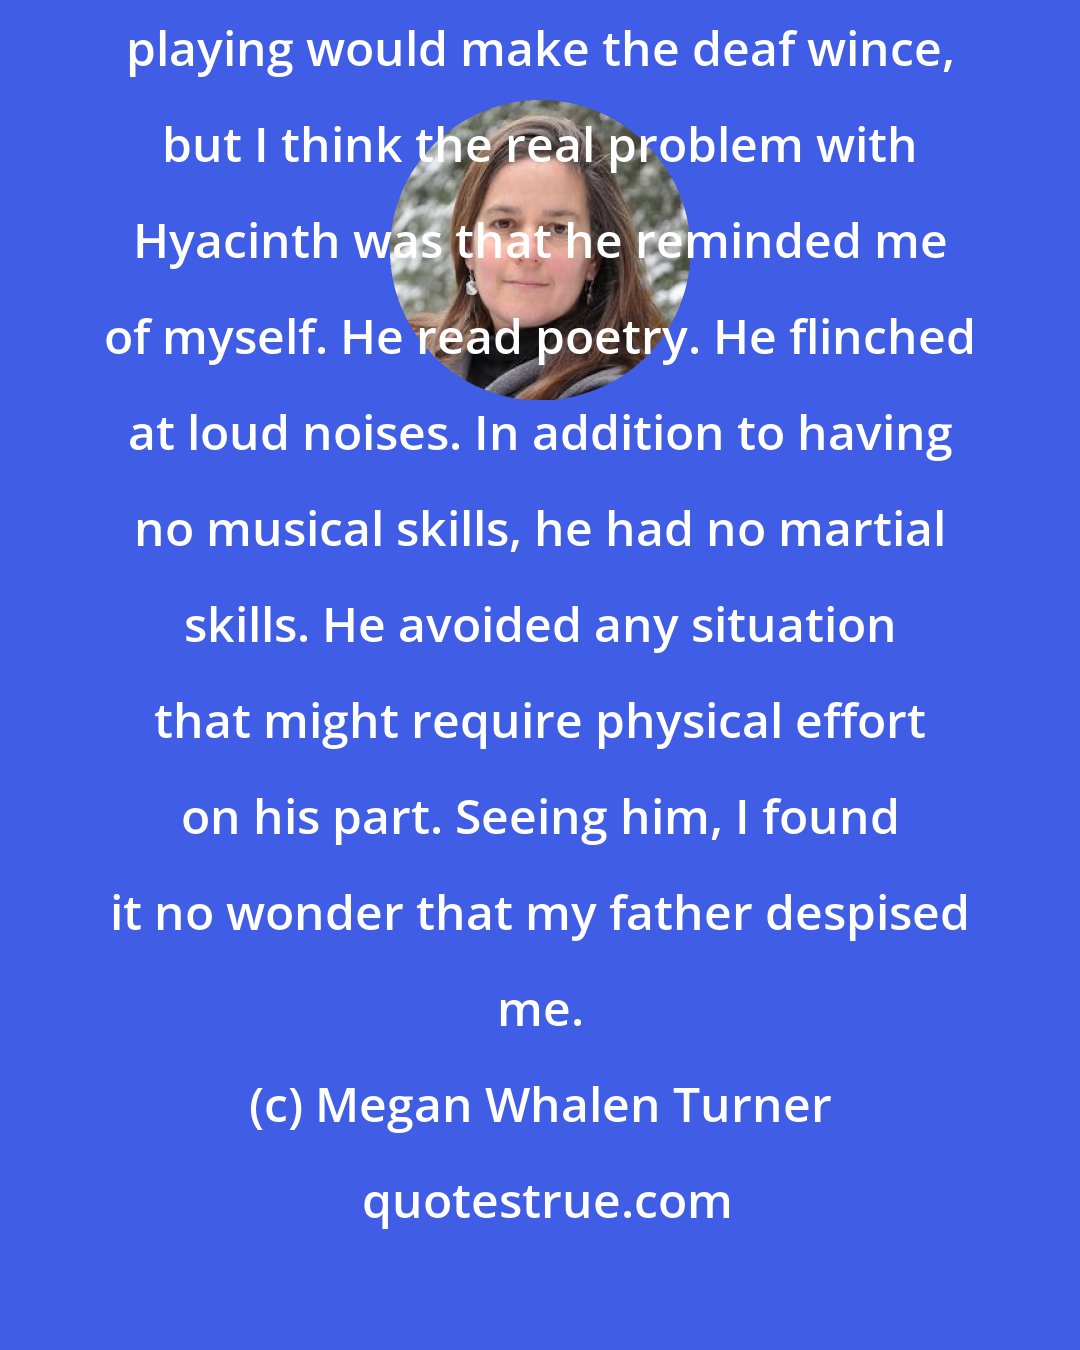 Megan Whalen Turner: Everything I said he agreed with, which was trying, and his flute playing would make the deaf wince, but I think the real problem with Hyacinth was that he reminded me of myself. He read poetry. He flinched at loud noises. In addition to having no musical skills, he had no martial skills. He avoided any situation that might require physical effort on his part. Seeing him, I found it no wonder that my father despised me.